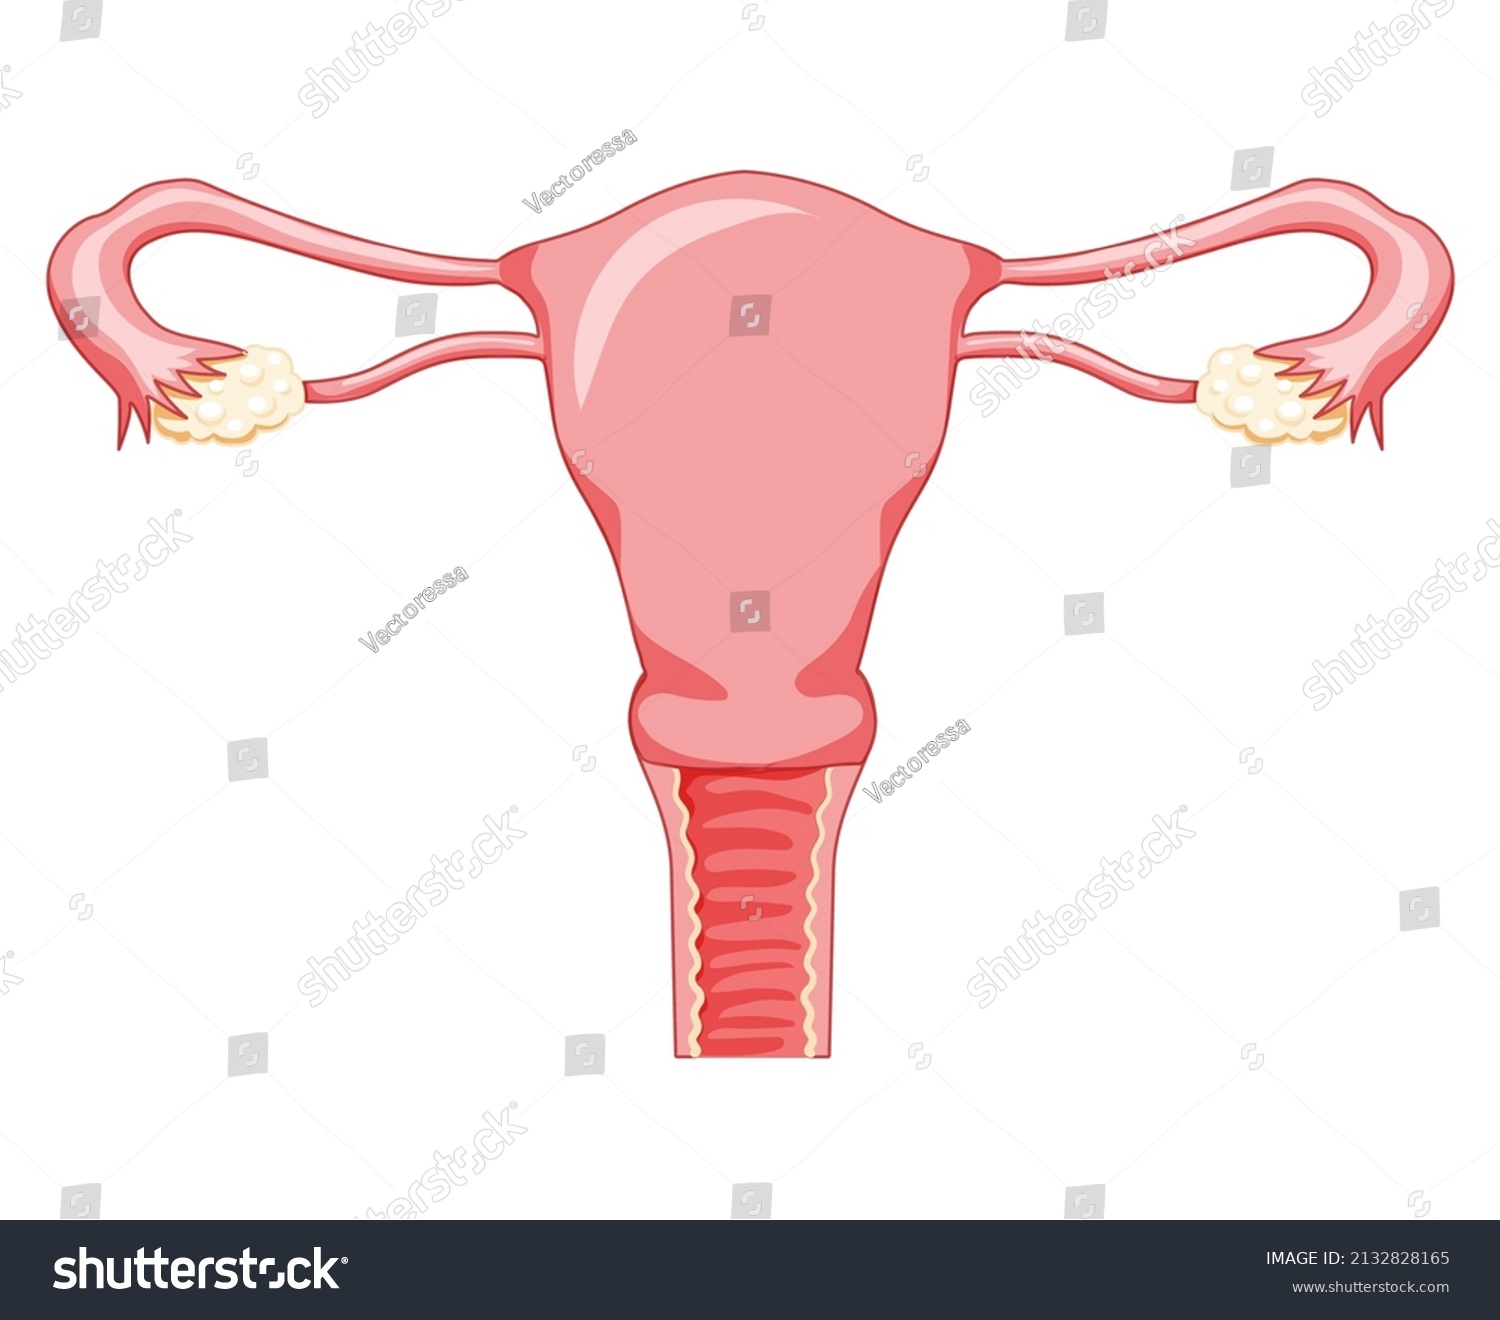 Female Reproductive System Vagina Frontal View Stock Vector Royalty Free 2132828165 Shutterstock 1645